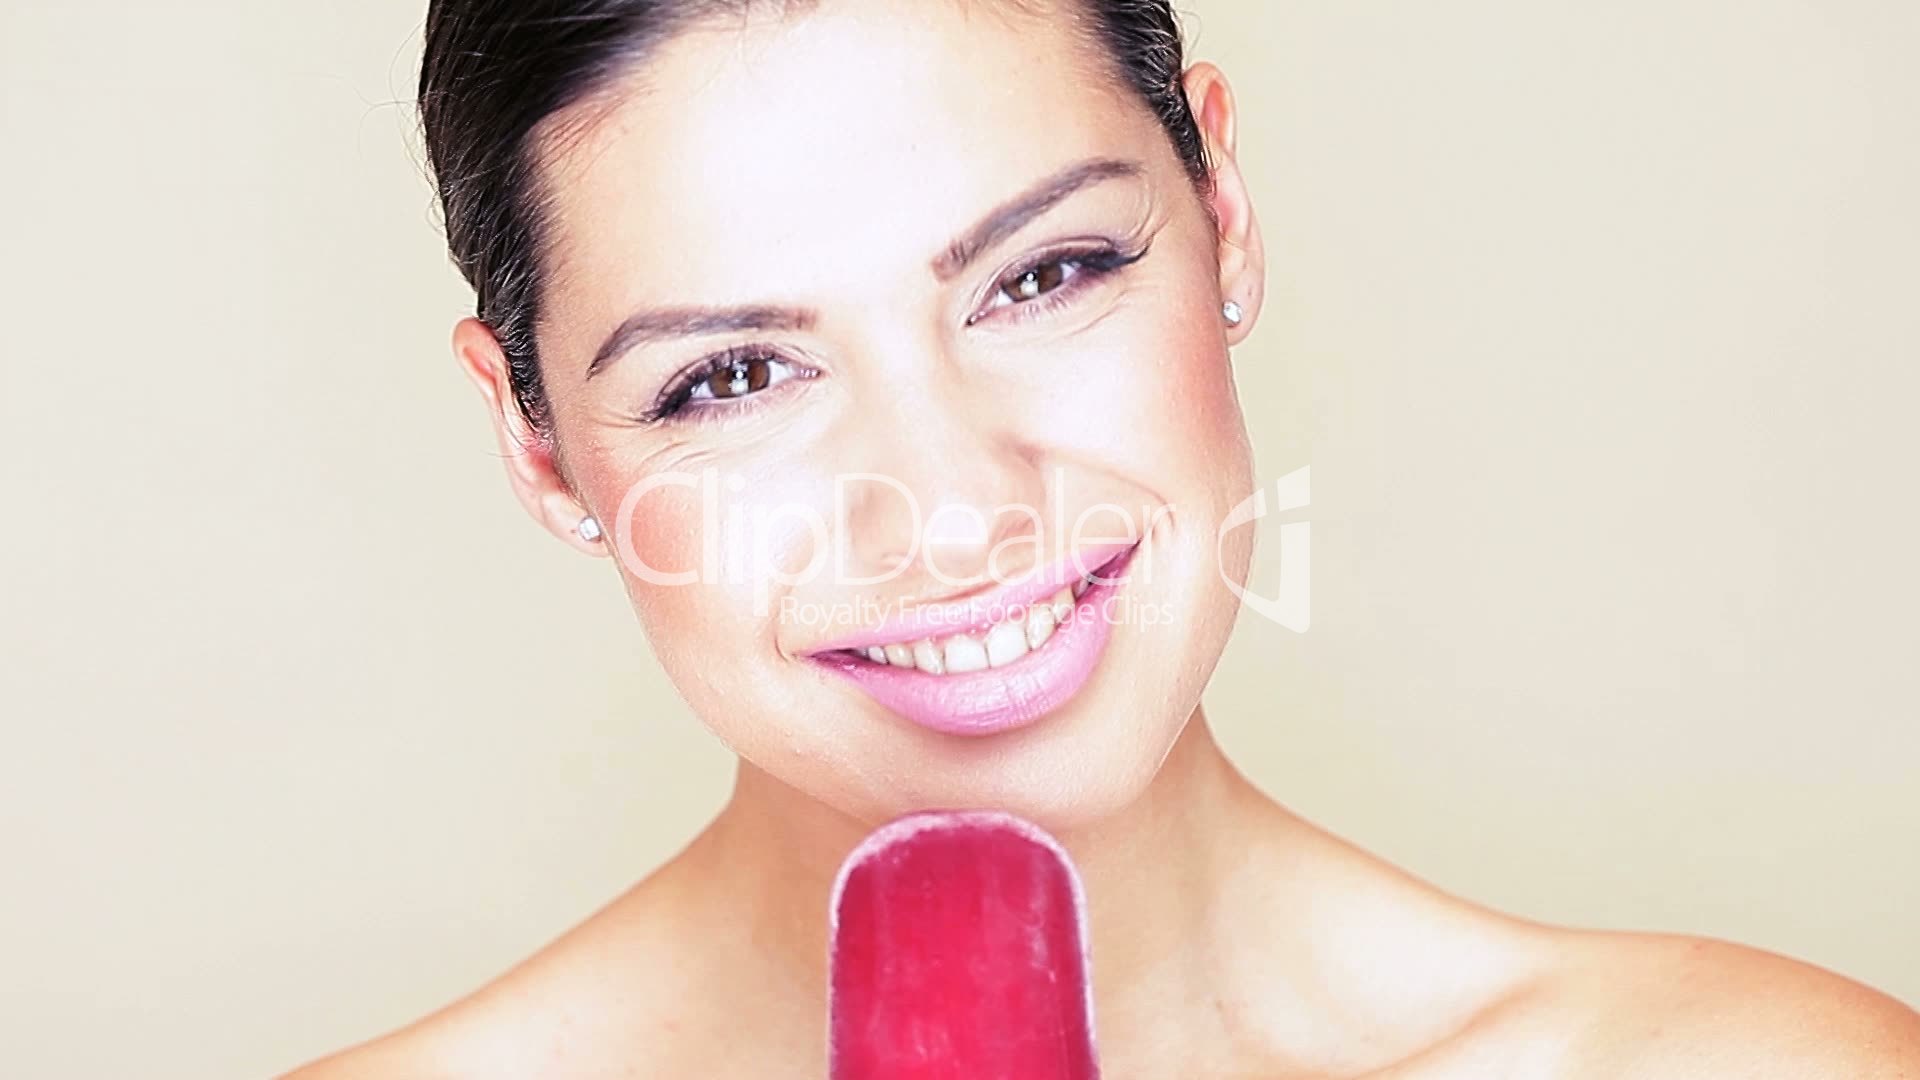 Woman with beautiful smile and ice lolly: Royalty-free video and ...